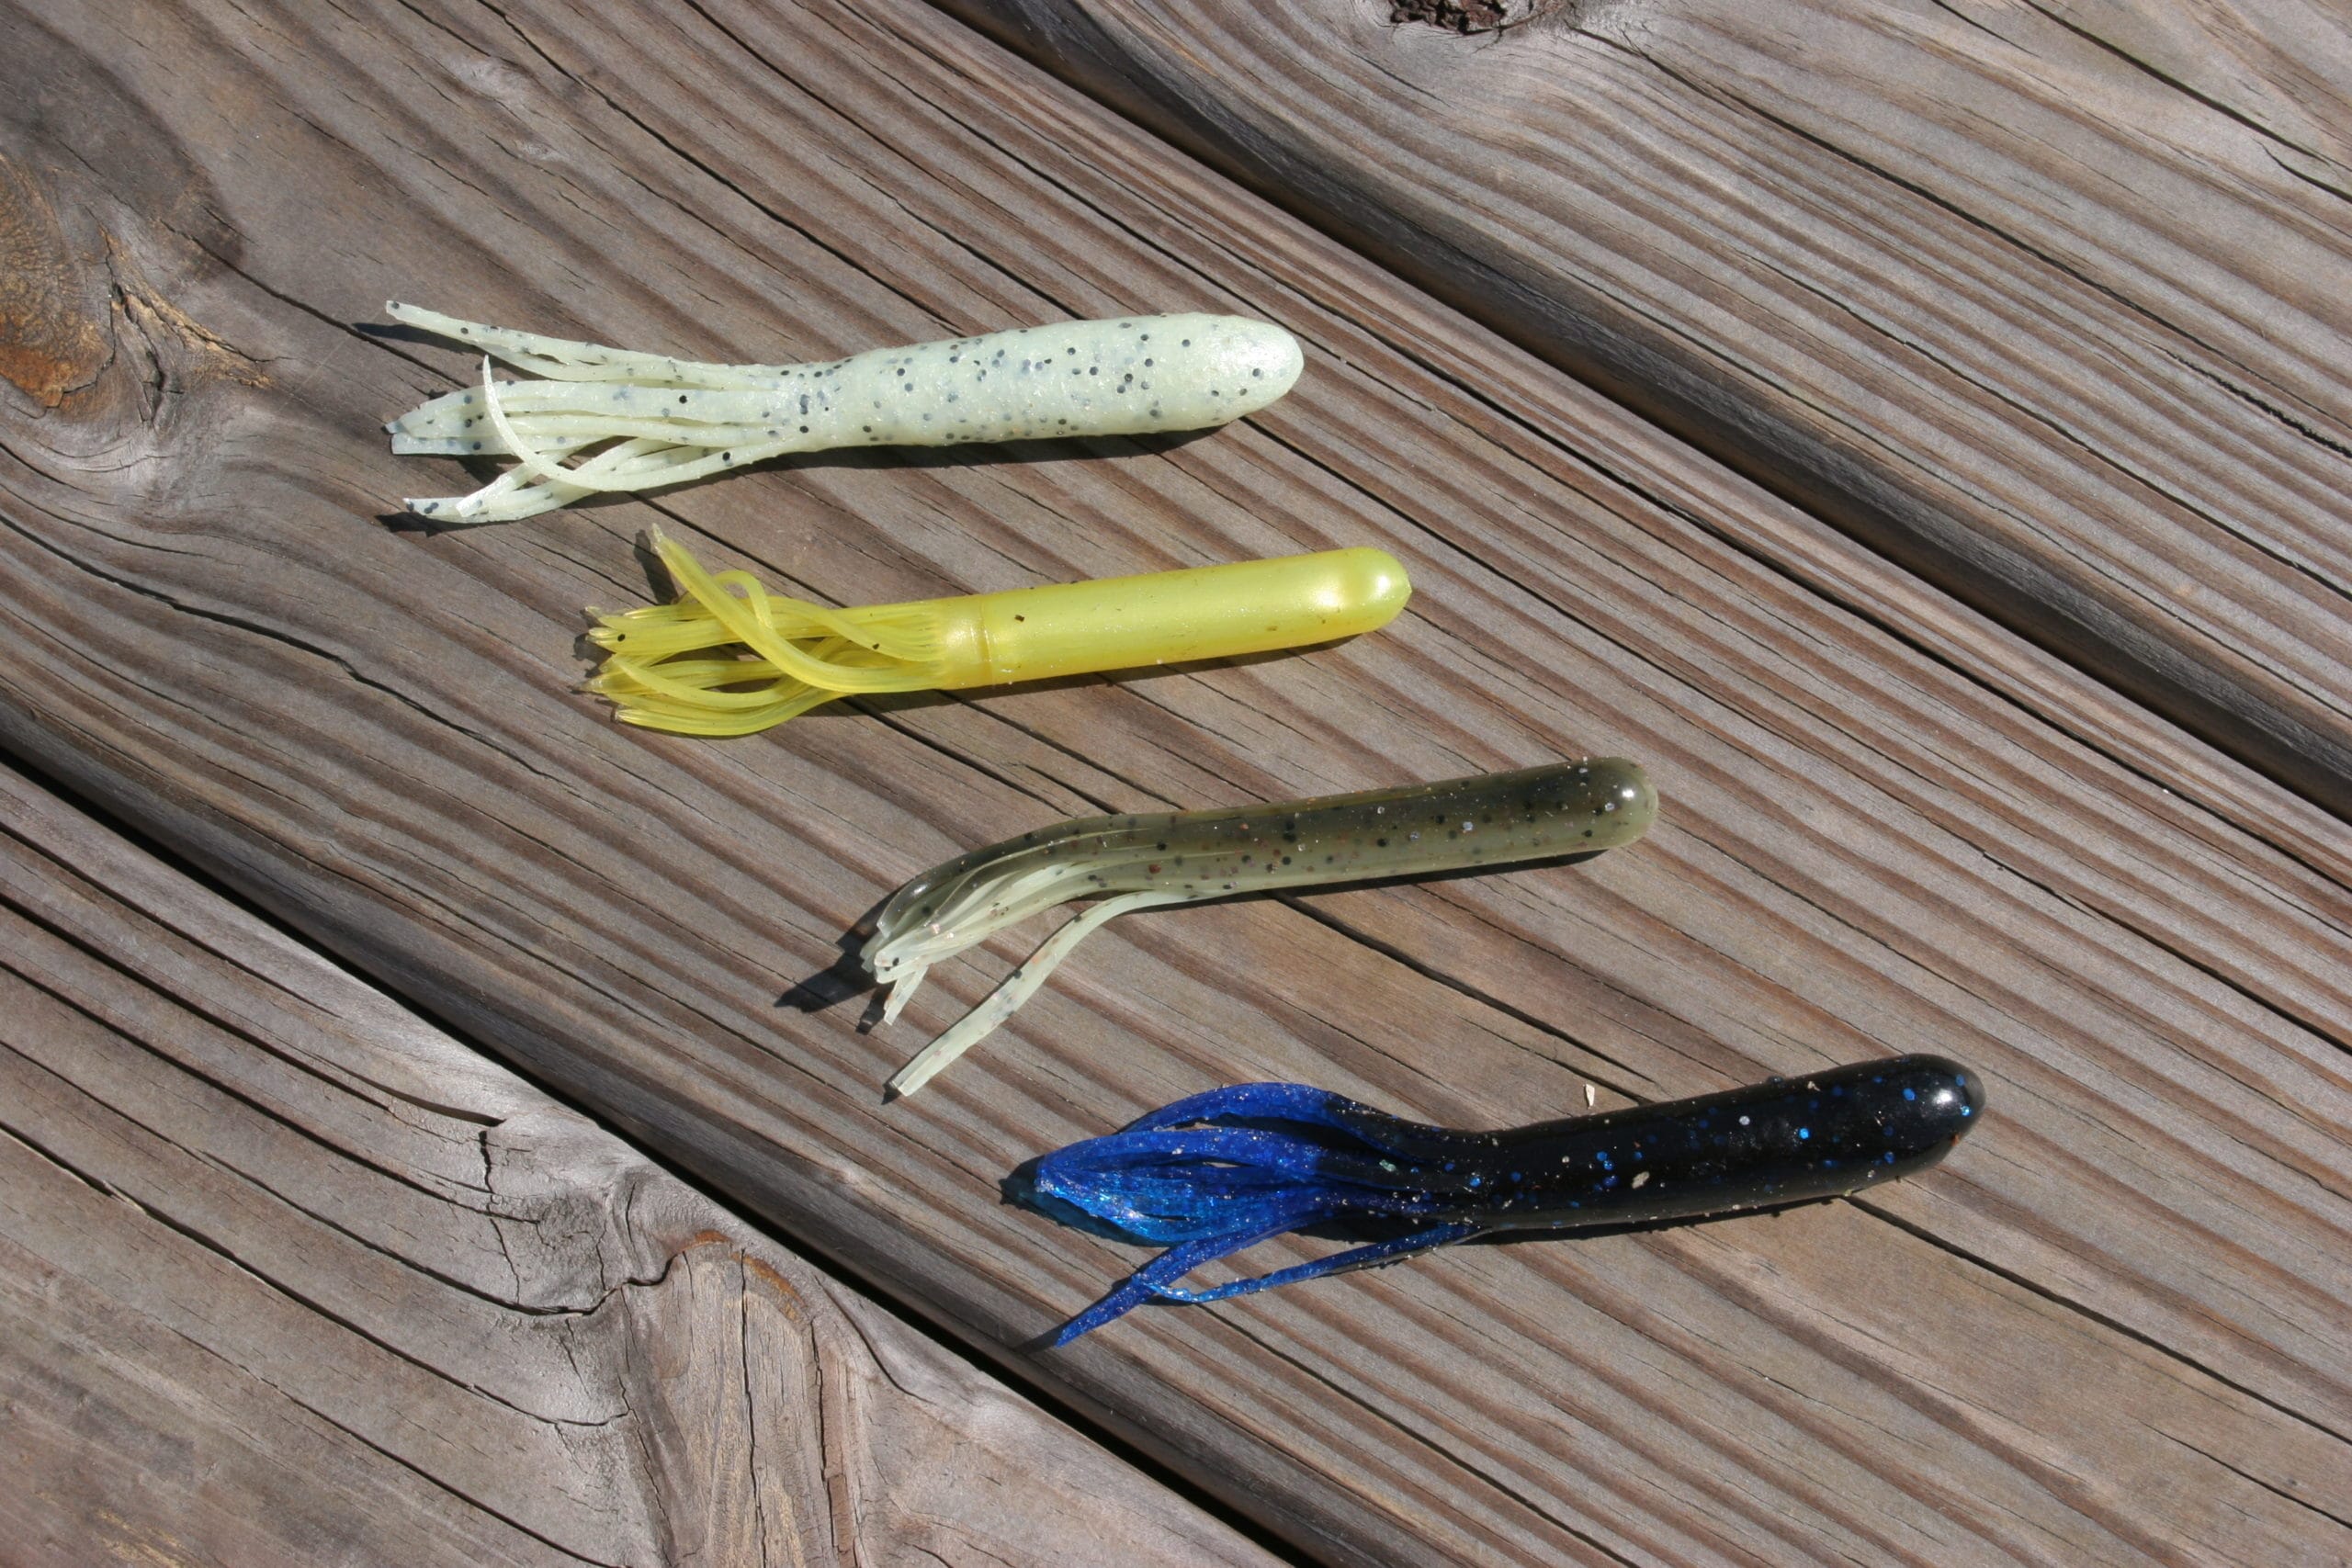 A quality tube bait is the perfect lure for “Finessing Fish In Wood.”